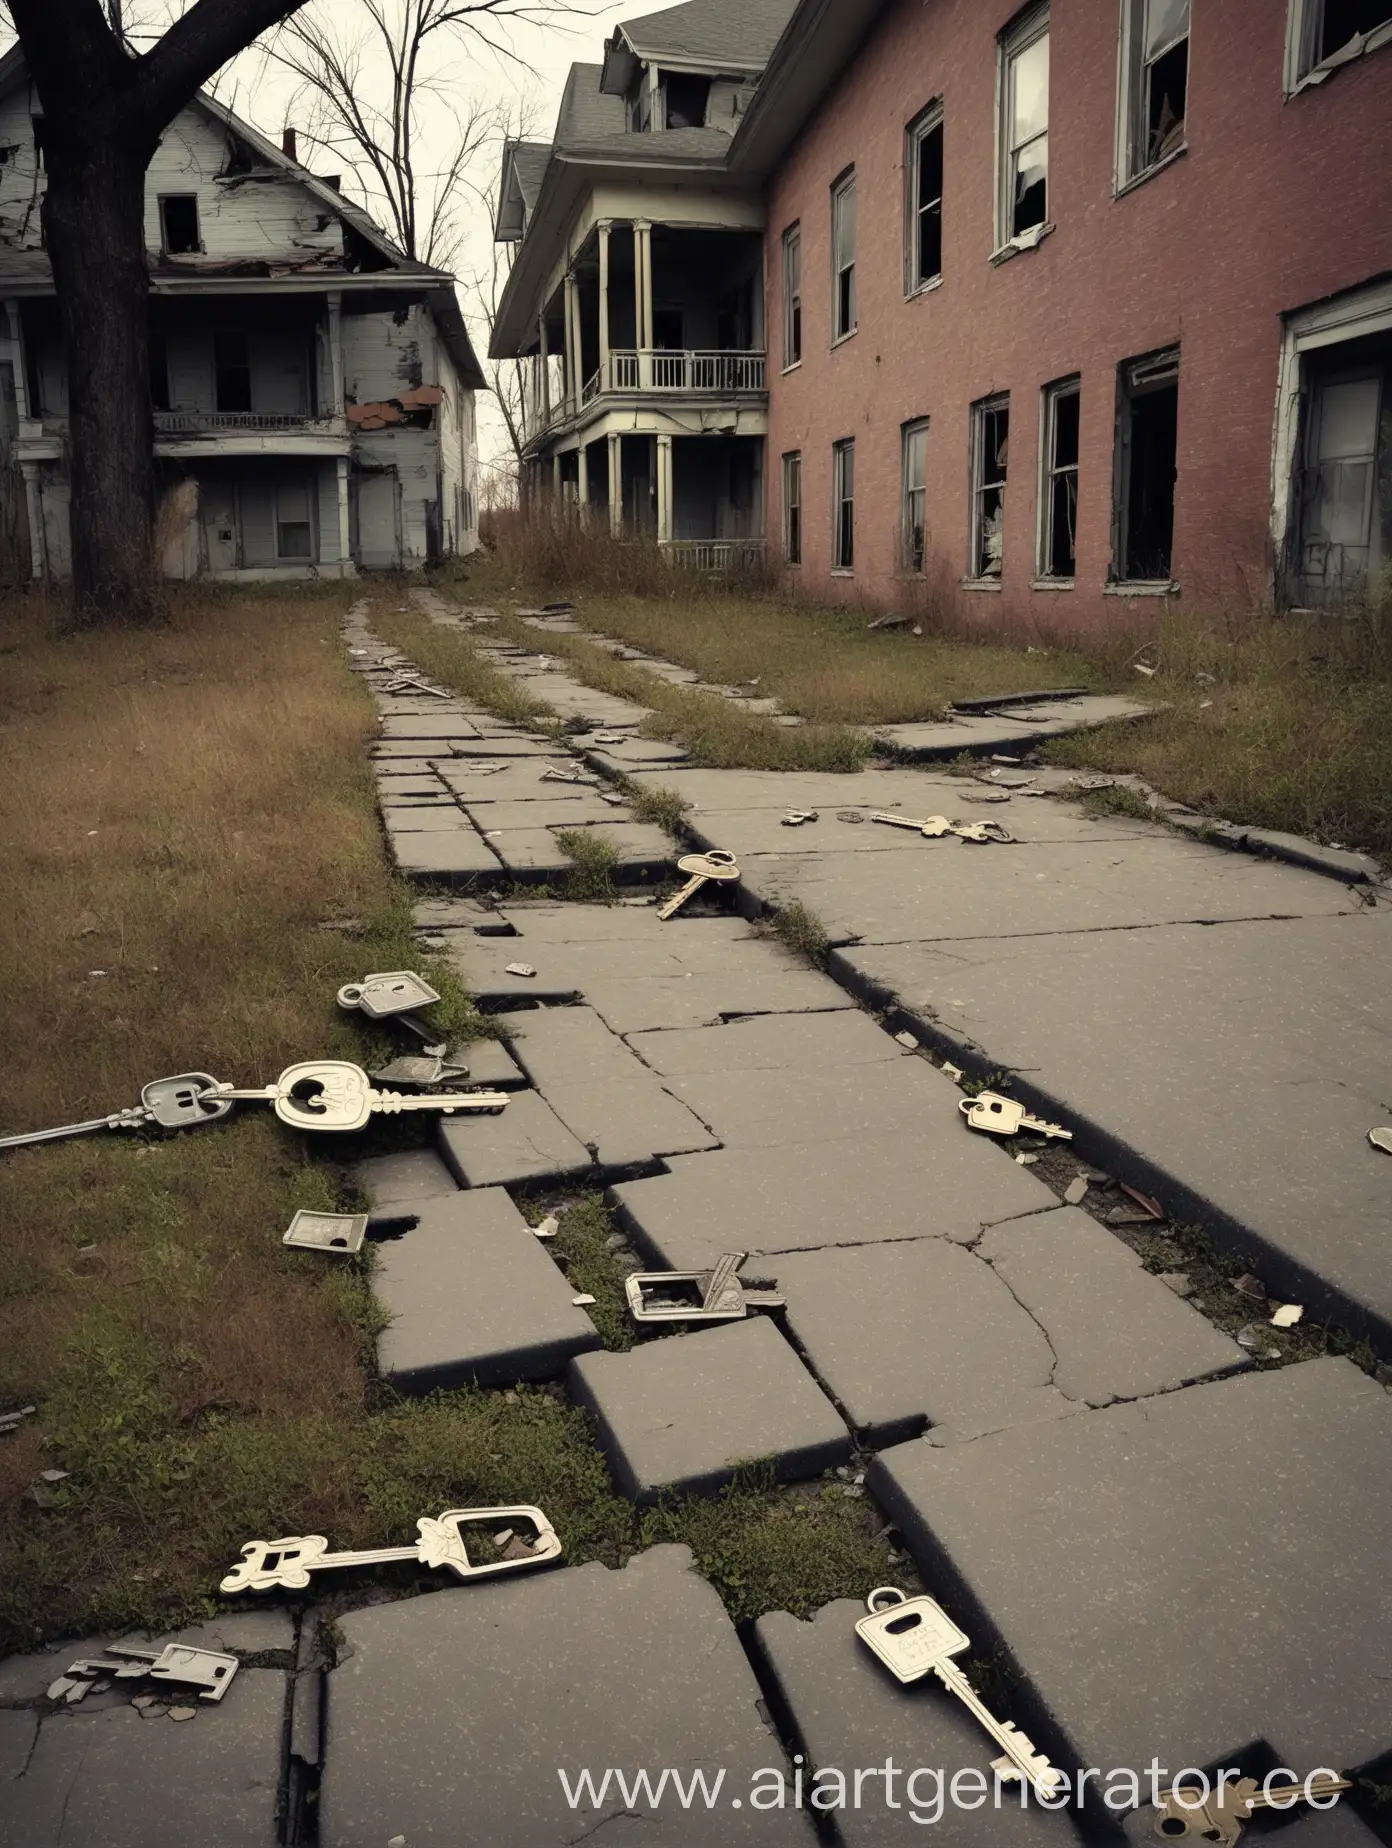 Abandoned-MultiFamily-House-with-Old-Curbs-and-Pavement